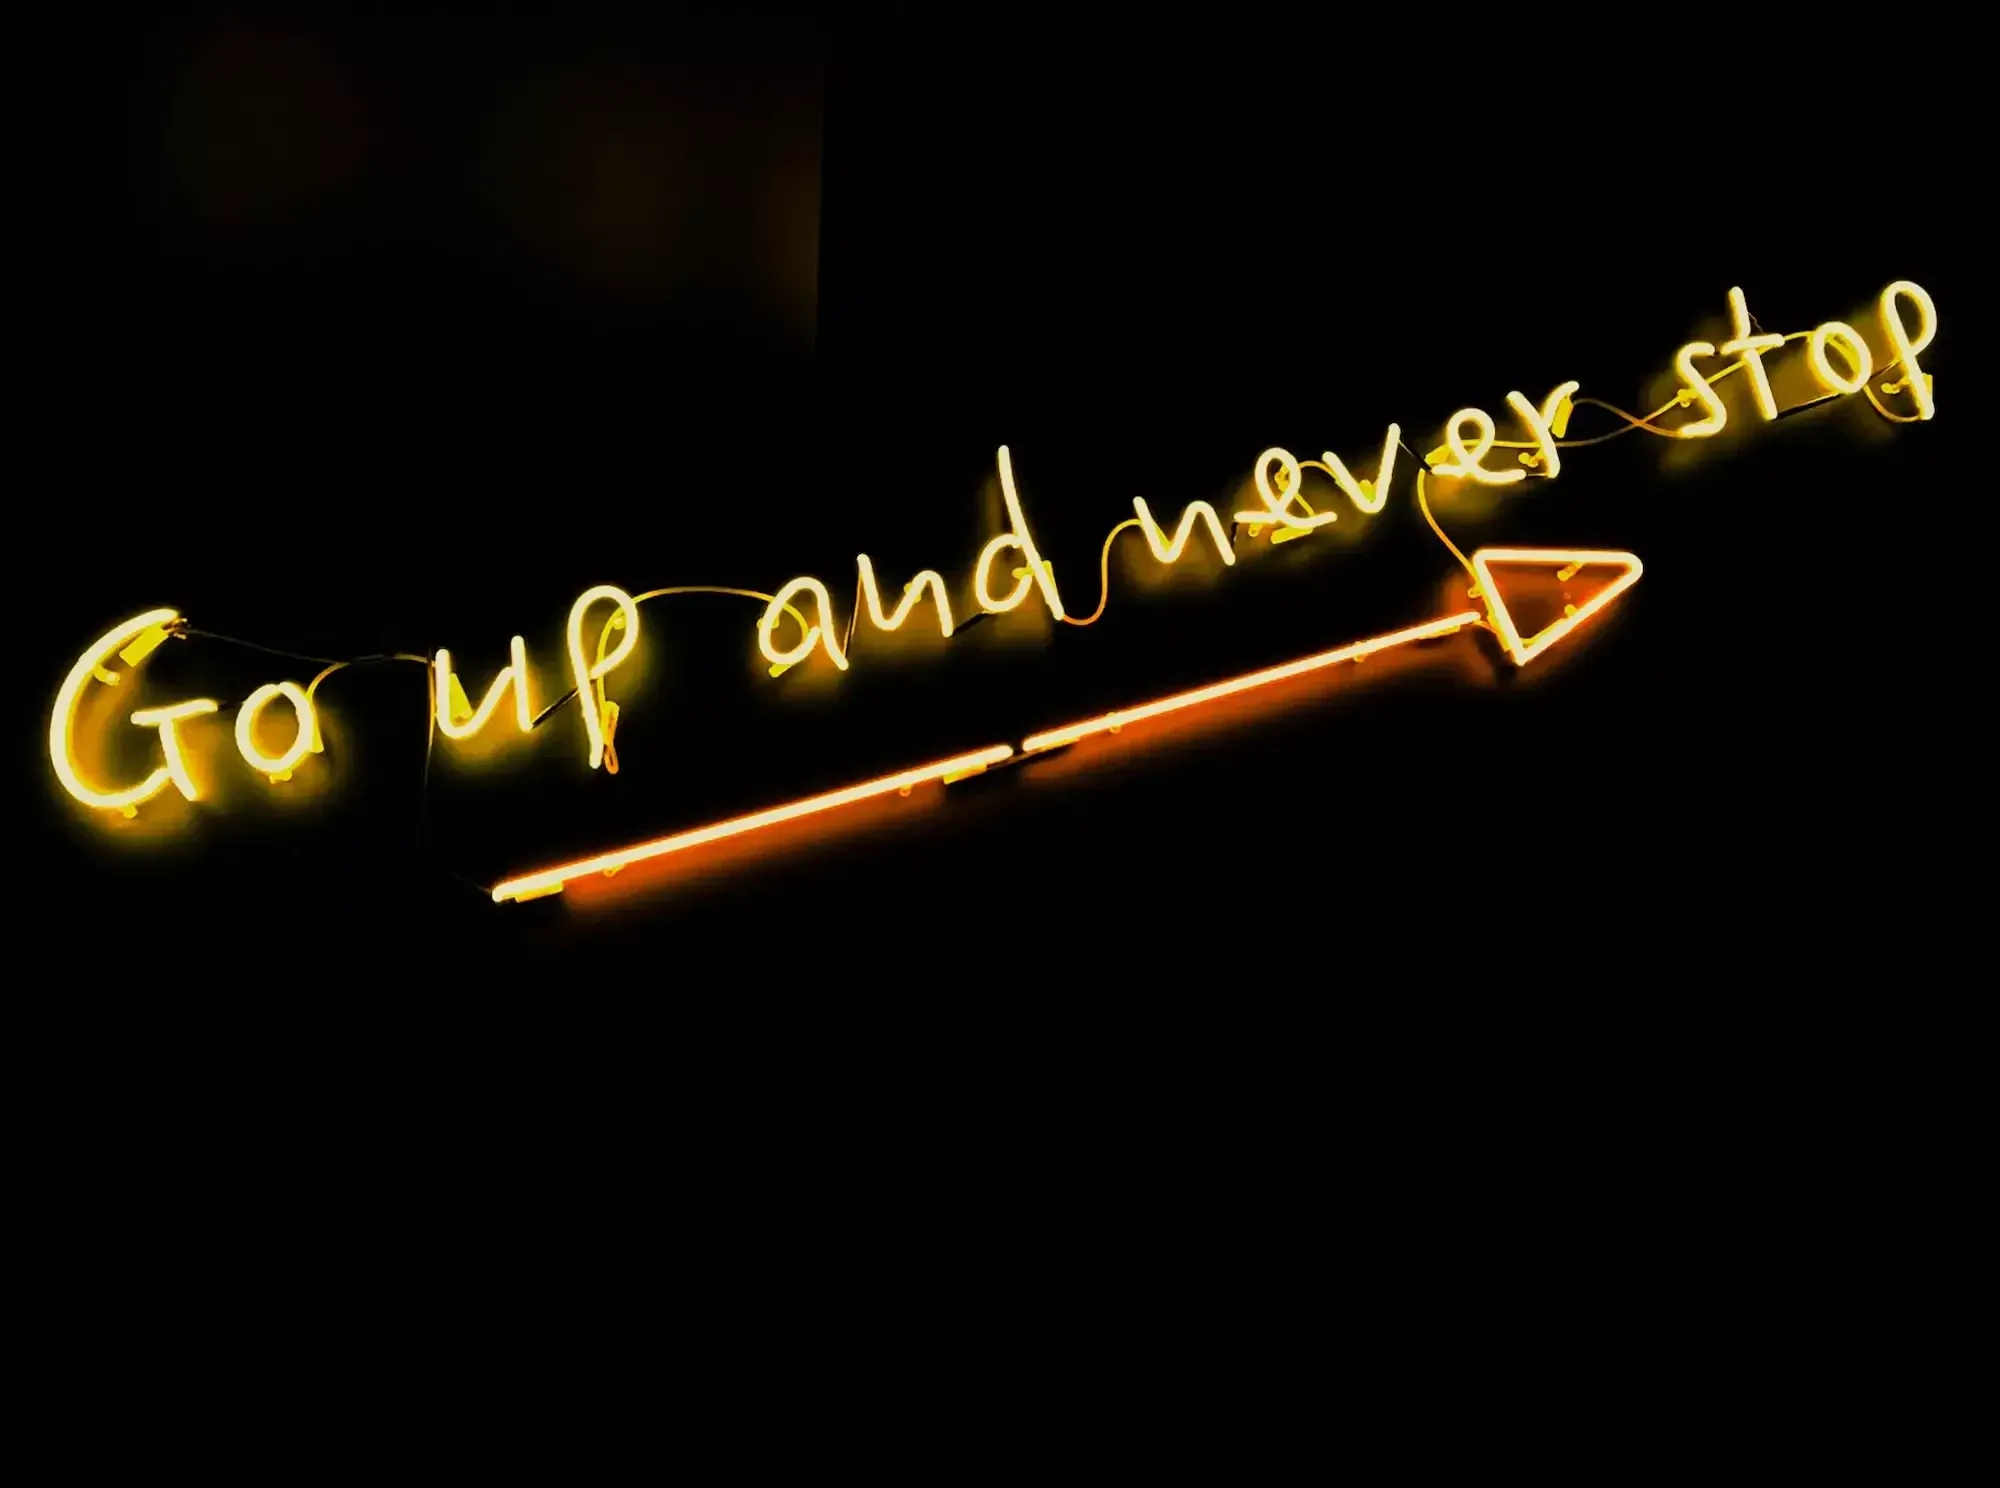 "Go up and never stop" in yellow illuminated lettering on a black background. 